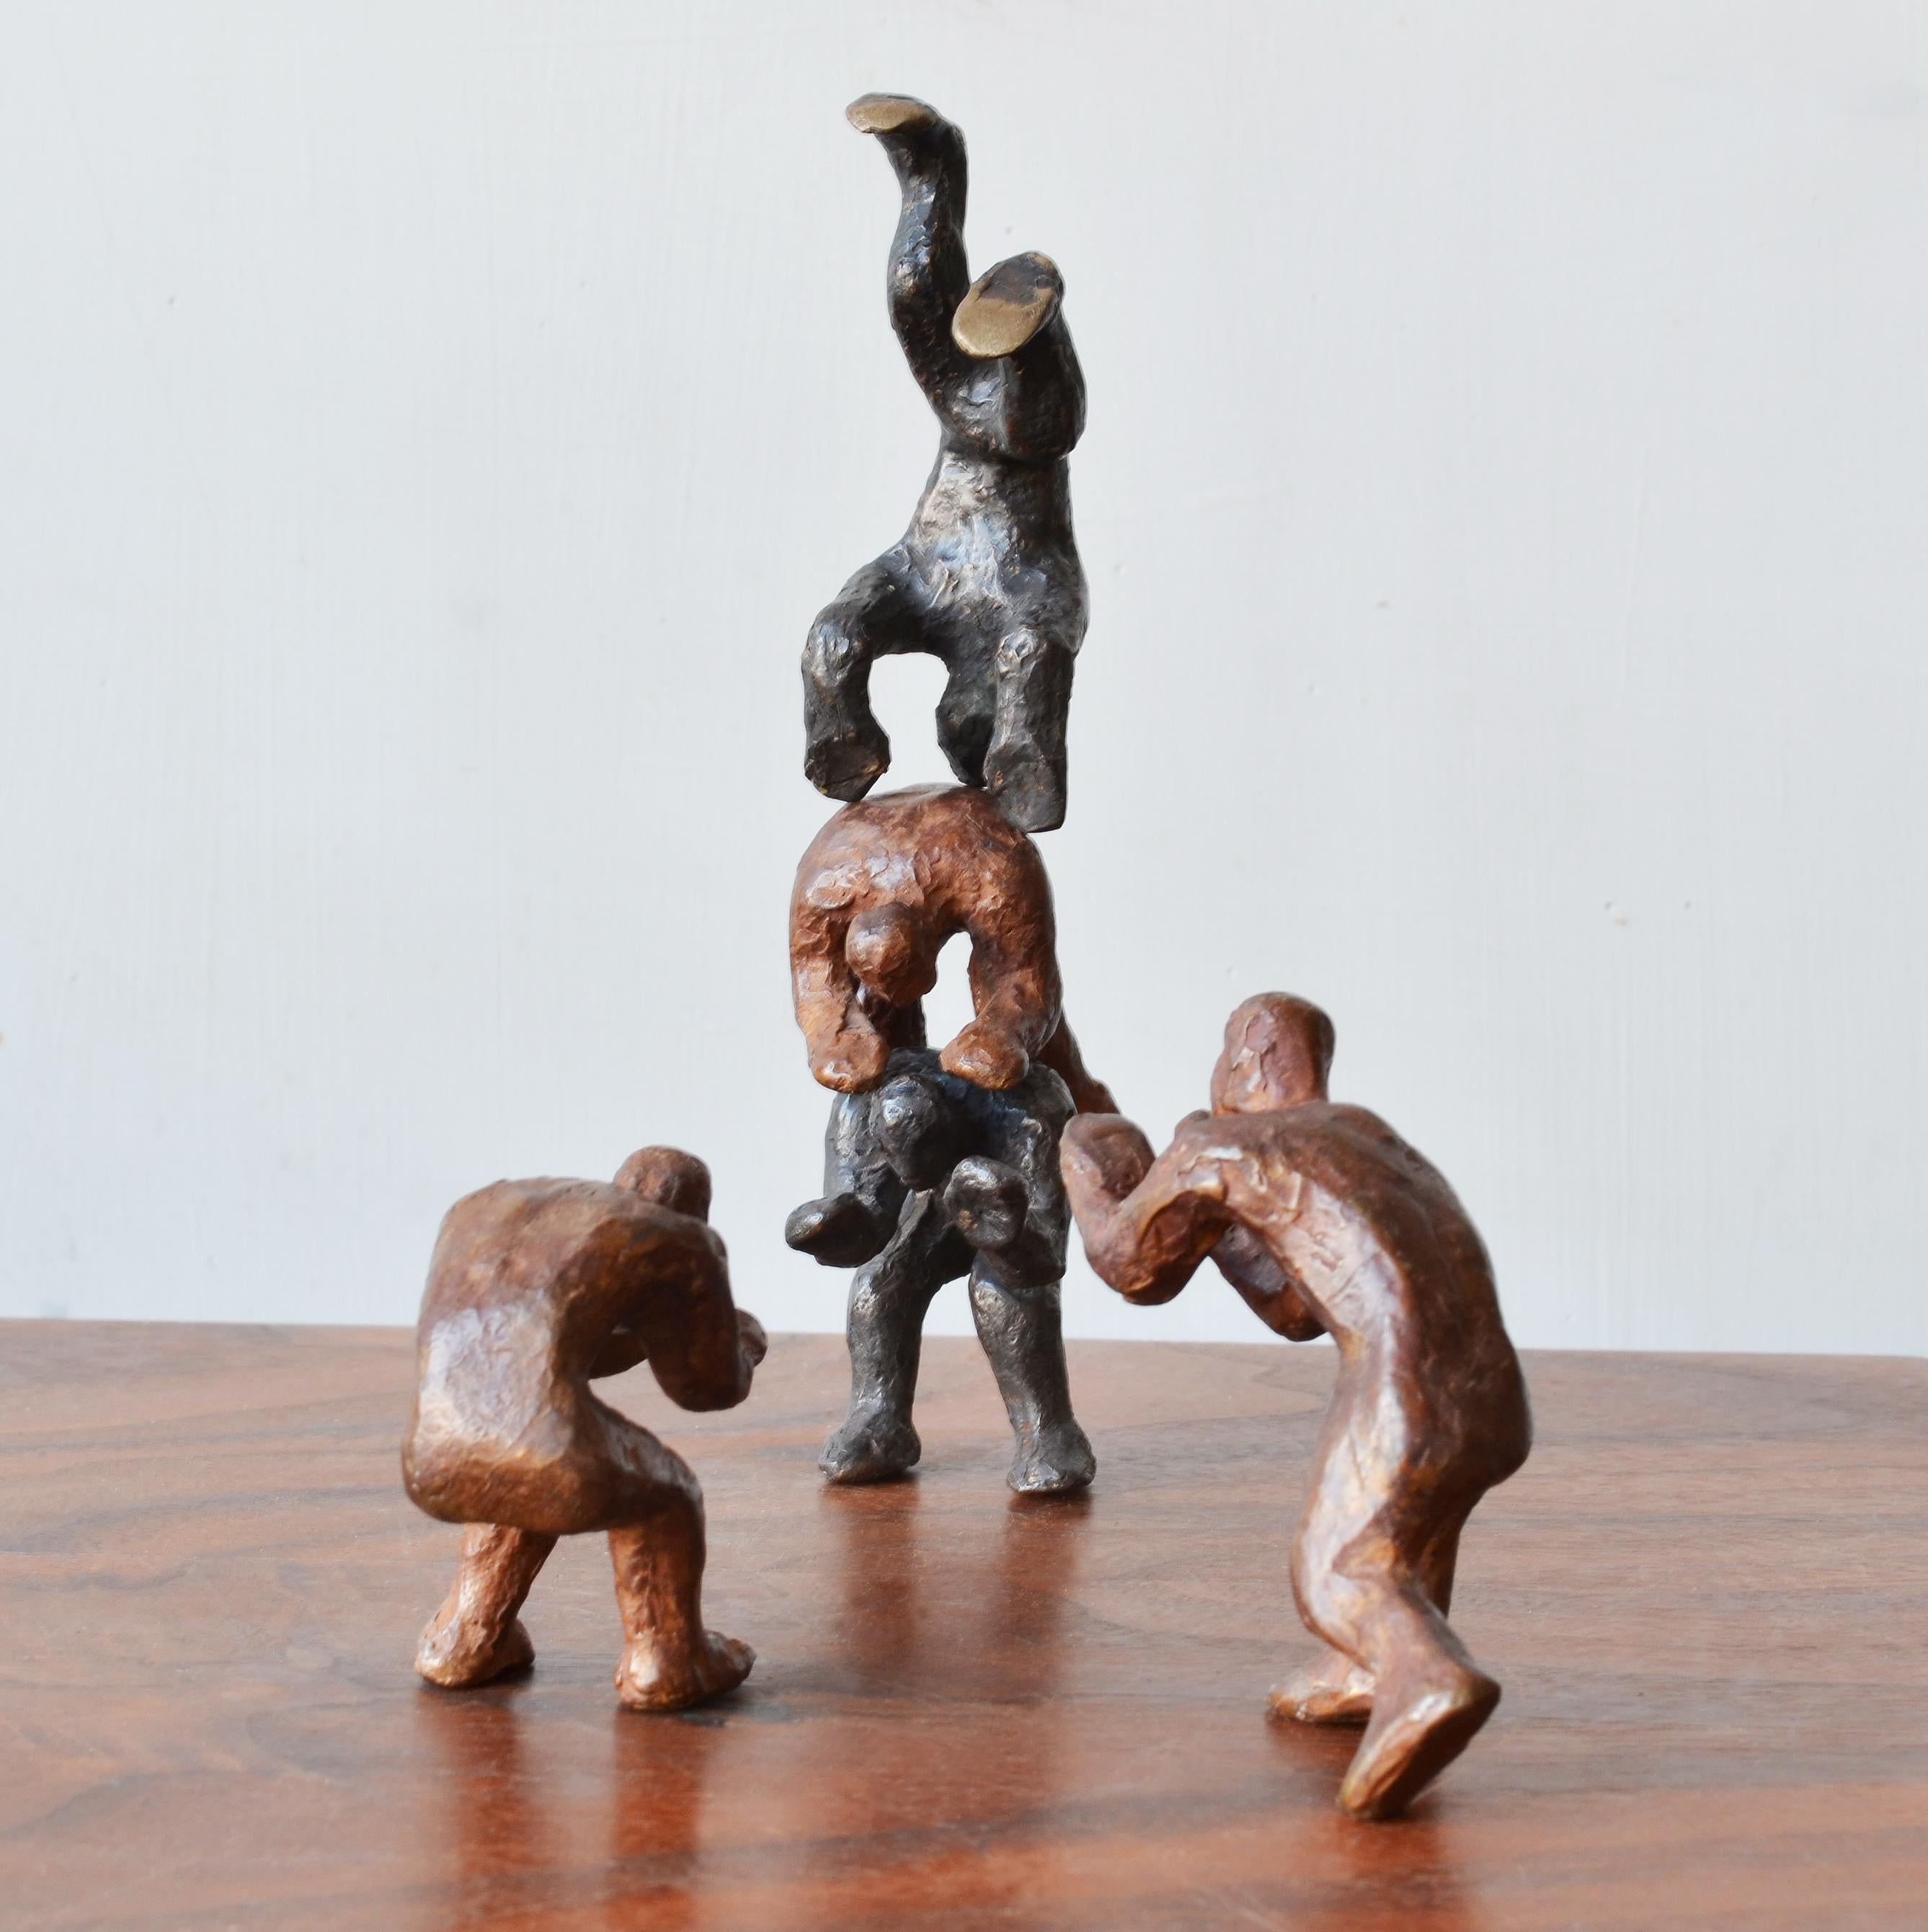 Why Fight When You Can Play? 2 Pairs of interactive miniature bronze figures  - Sculpture by Noa Bornstein